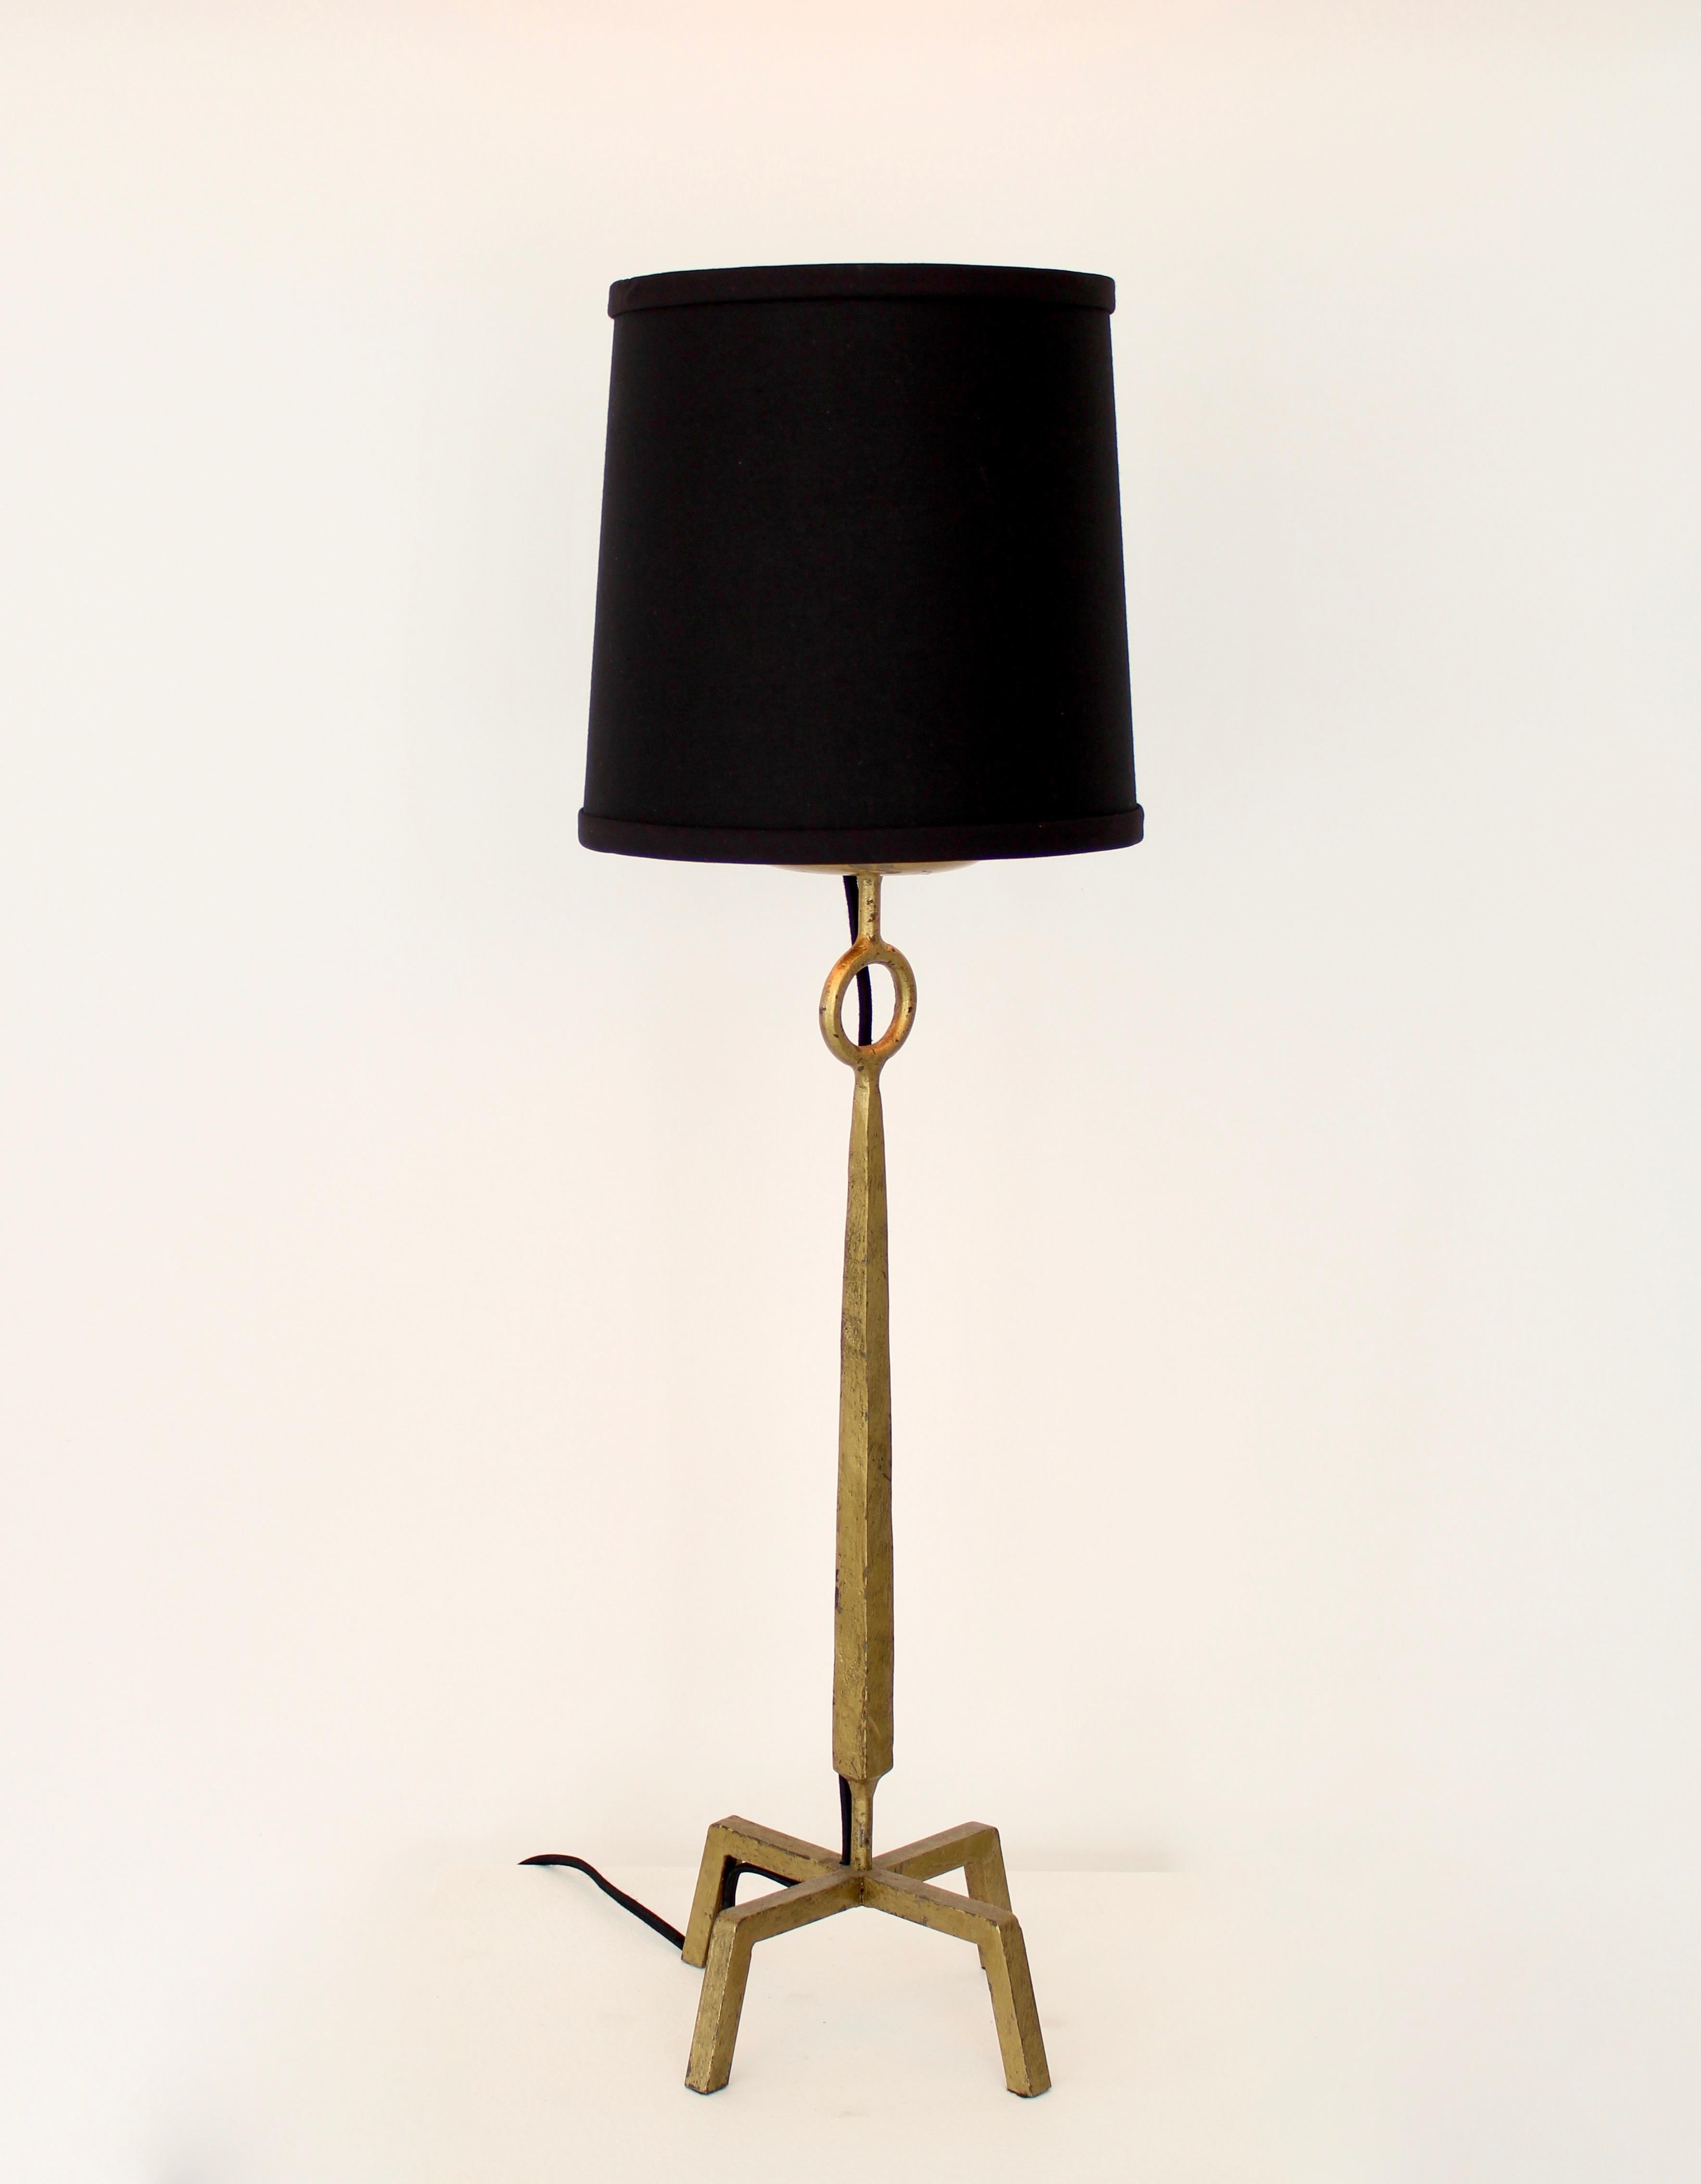 Gilt Maison Ramsay French Neoclassical Table Lamp Gilded Iron on Four Foot Base